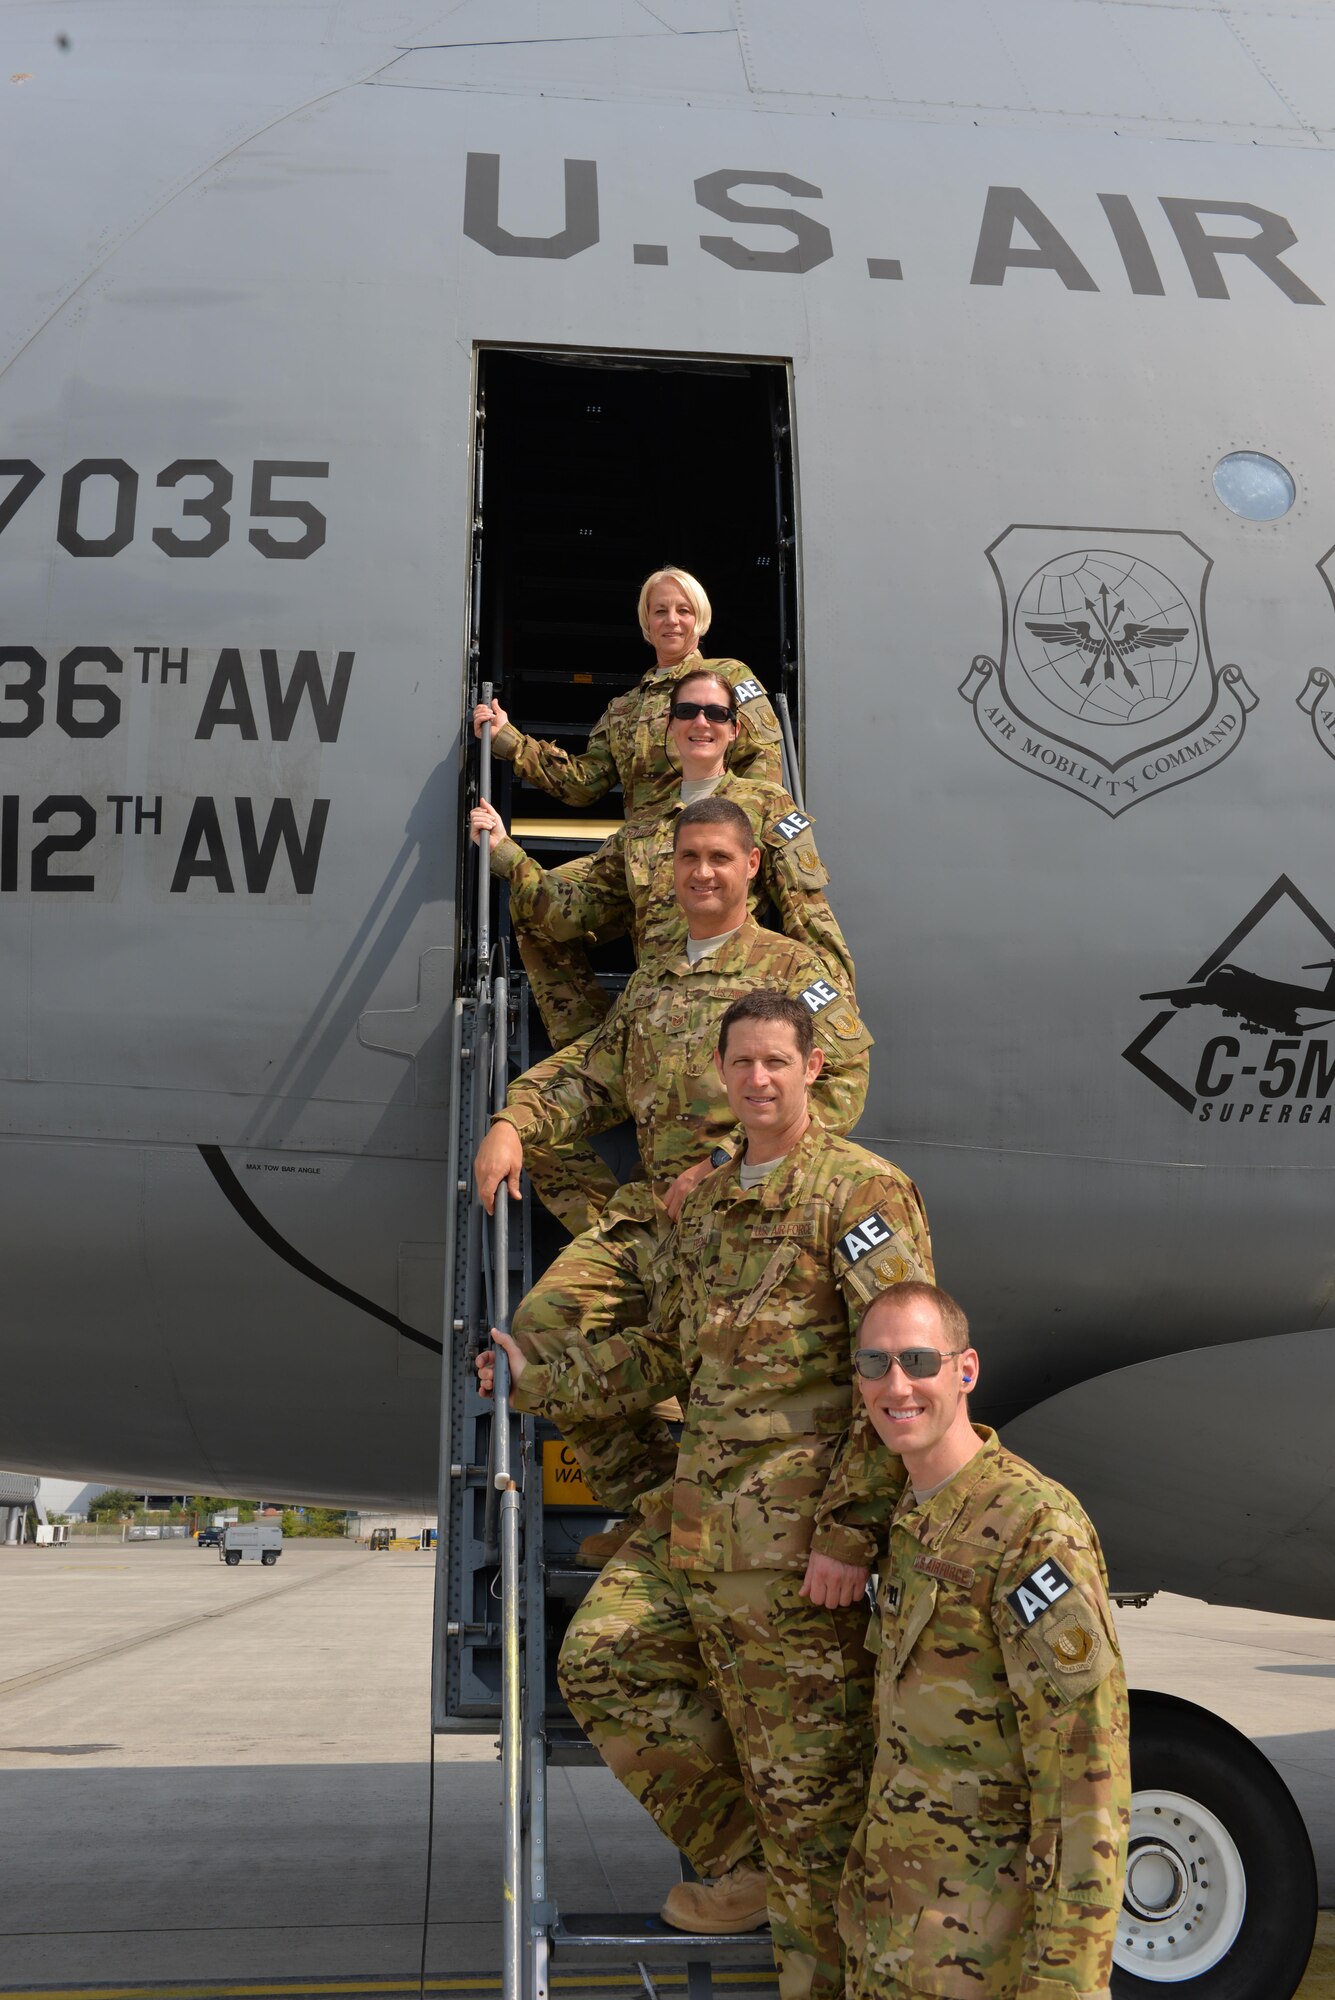 U.S. Airmen assigned to the 455th Expeditionary Aeromedical Evacuation Squadron pose for a photo after an AE mission to Germany prior to boarding a C-5M Galaxy, Aug. 12, 2015. The 455th EAES Airmen are charged with the responsibility of evacuating the sick and wounded from Central Command to higher echelons of medical care. (U.S. Air Force photo by Maj. Tony Wickman/Released)